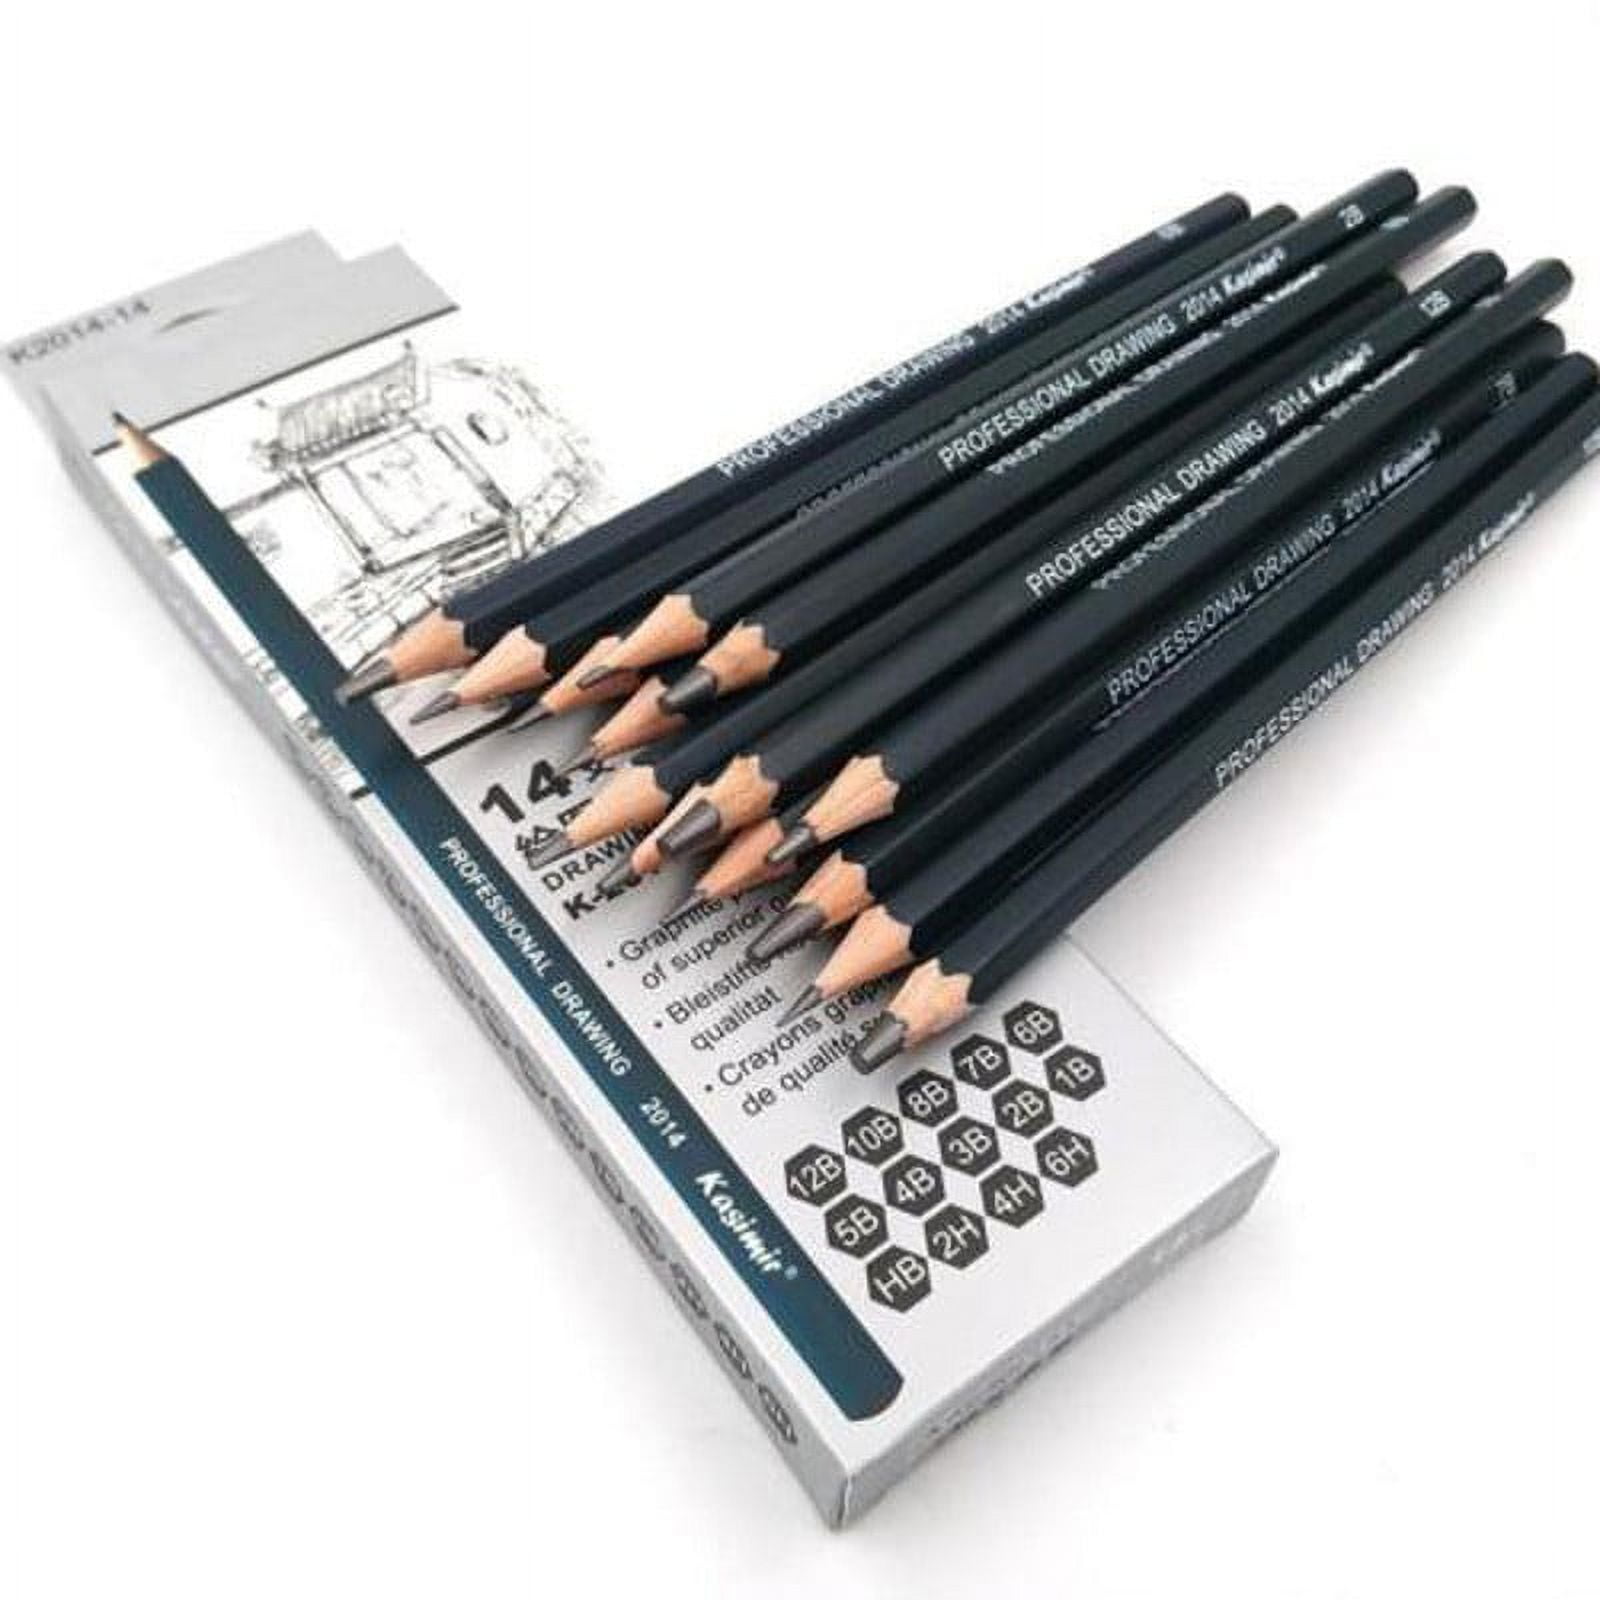 Arrtx Premium Hardcover Sketch Book + Professional Drawing Sketch Pencils |  14 Pack #2 HB Art Sketching Pencils for Drawing and Shading